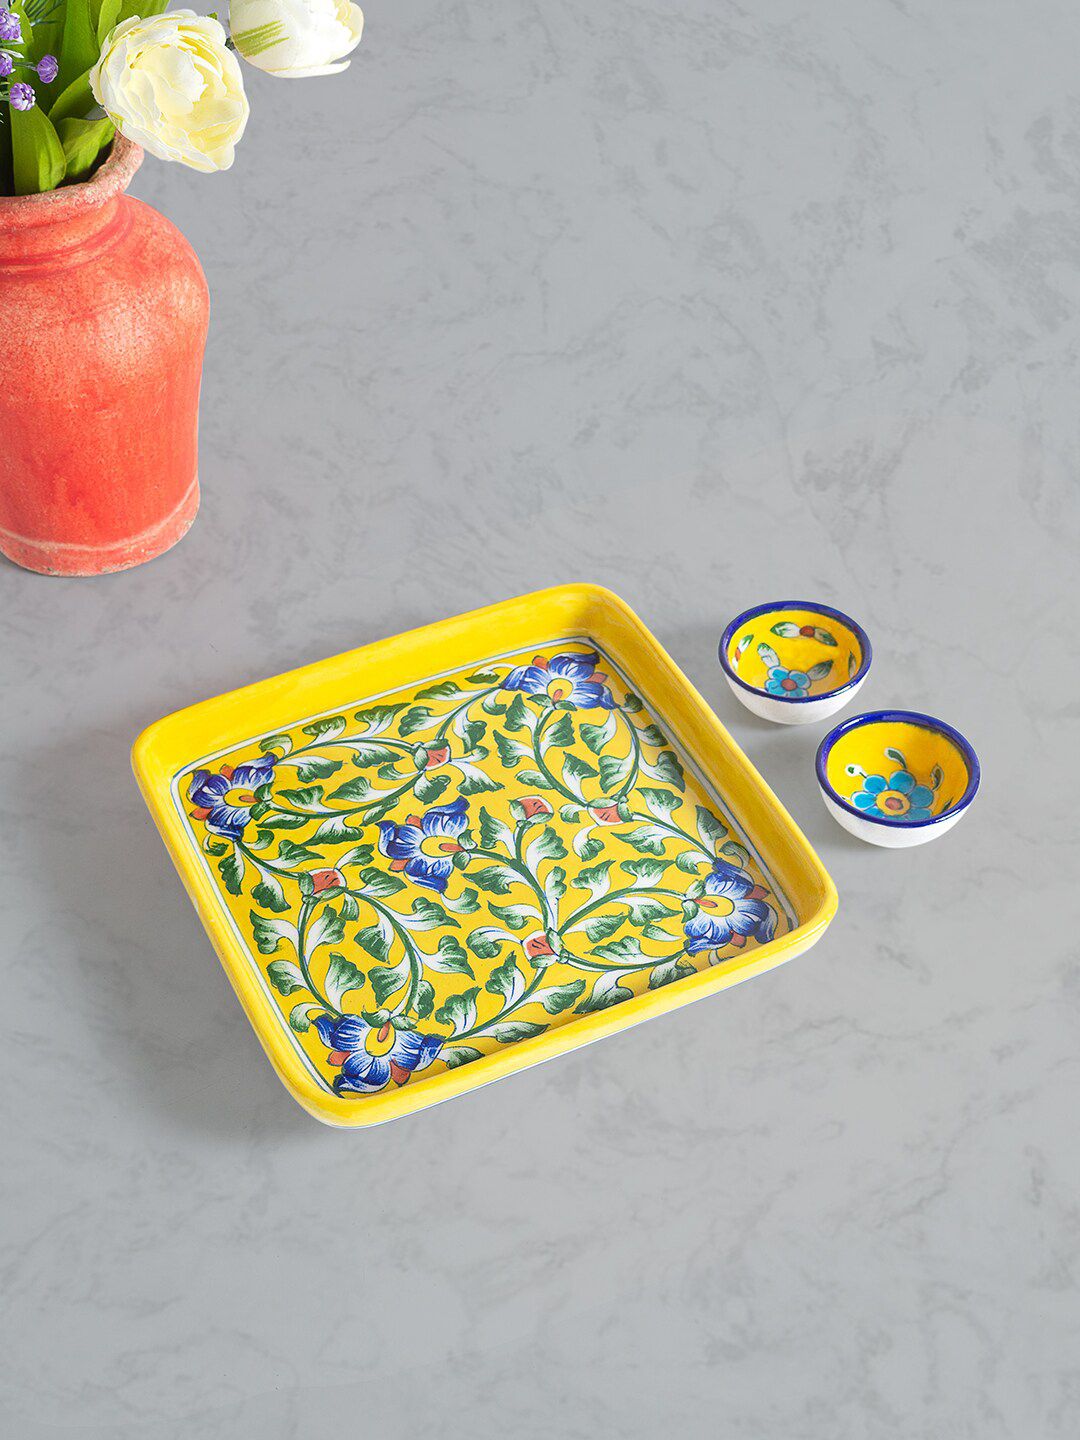 Golden Peacock Yellow Floral Pottery Ceramic Tray With Bowls Price in India